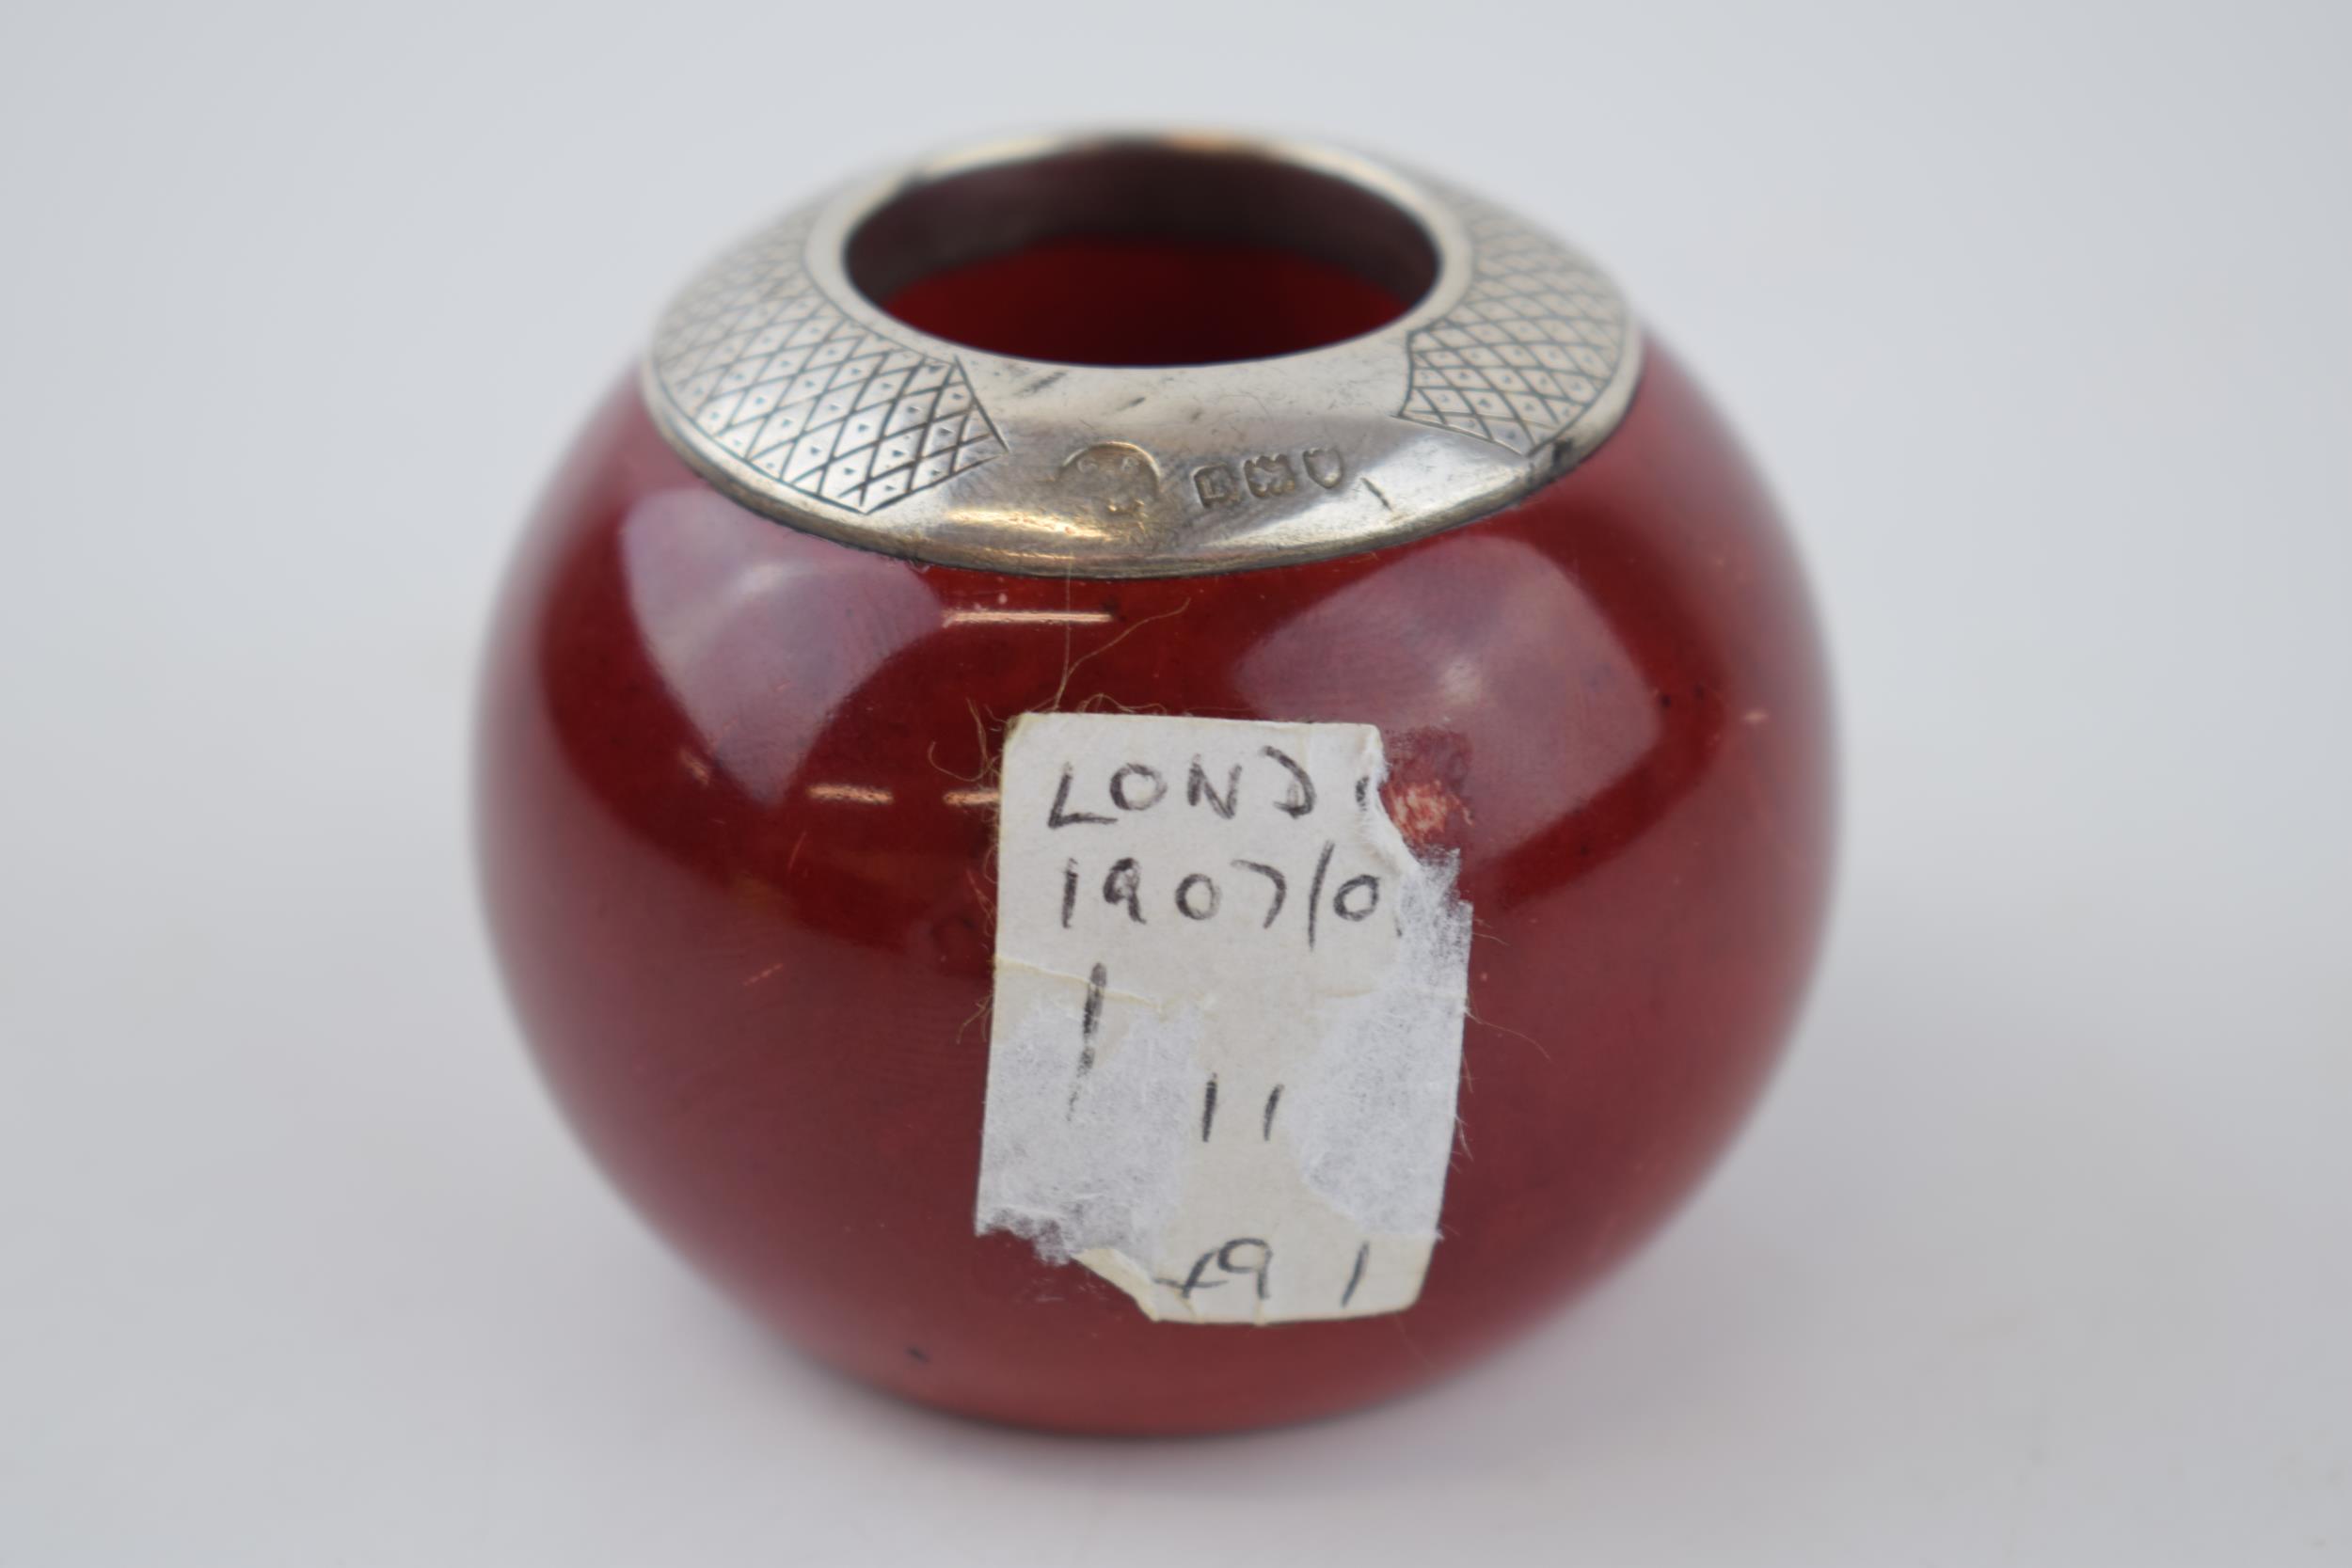 Royal Doulton flambe match holder and striker, London 1907, 6.5cm diameter. Good condition, - Image 2 of 3